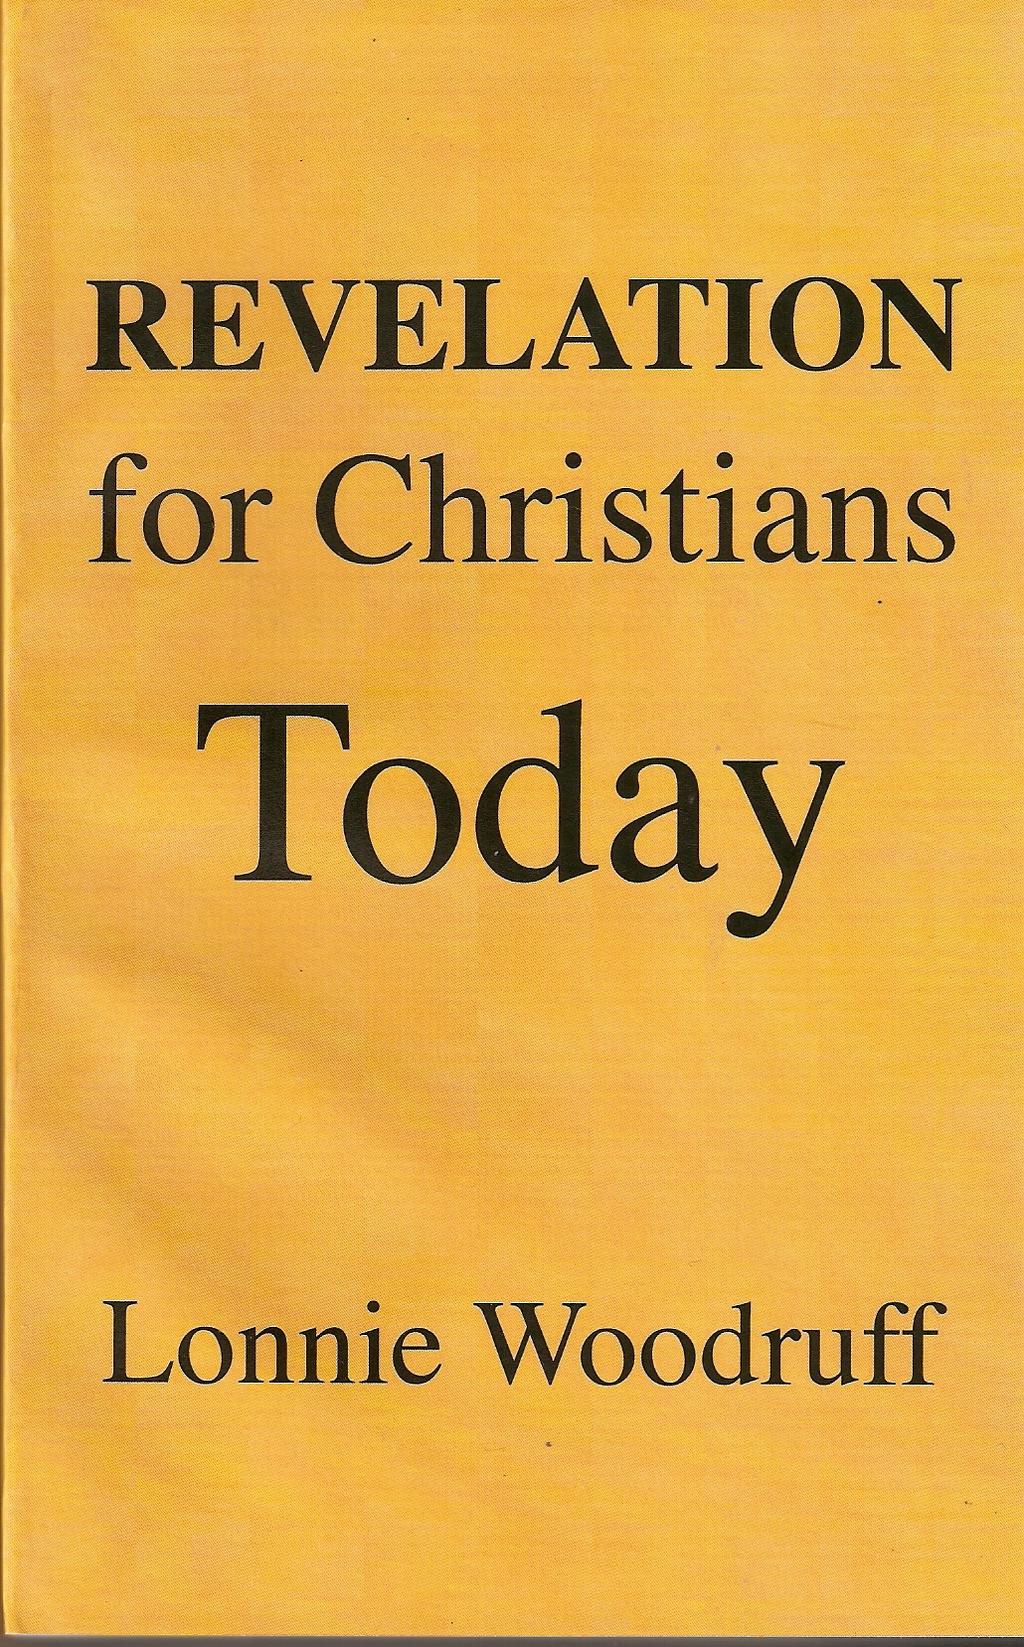 Books by Lonnie Woodruff Revelation For Christians Today Eden To Eden We must begin to realize that Revelation is a prophecy about the church. It is not about the destruction of Jerusalem or Rome.